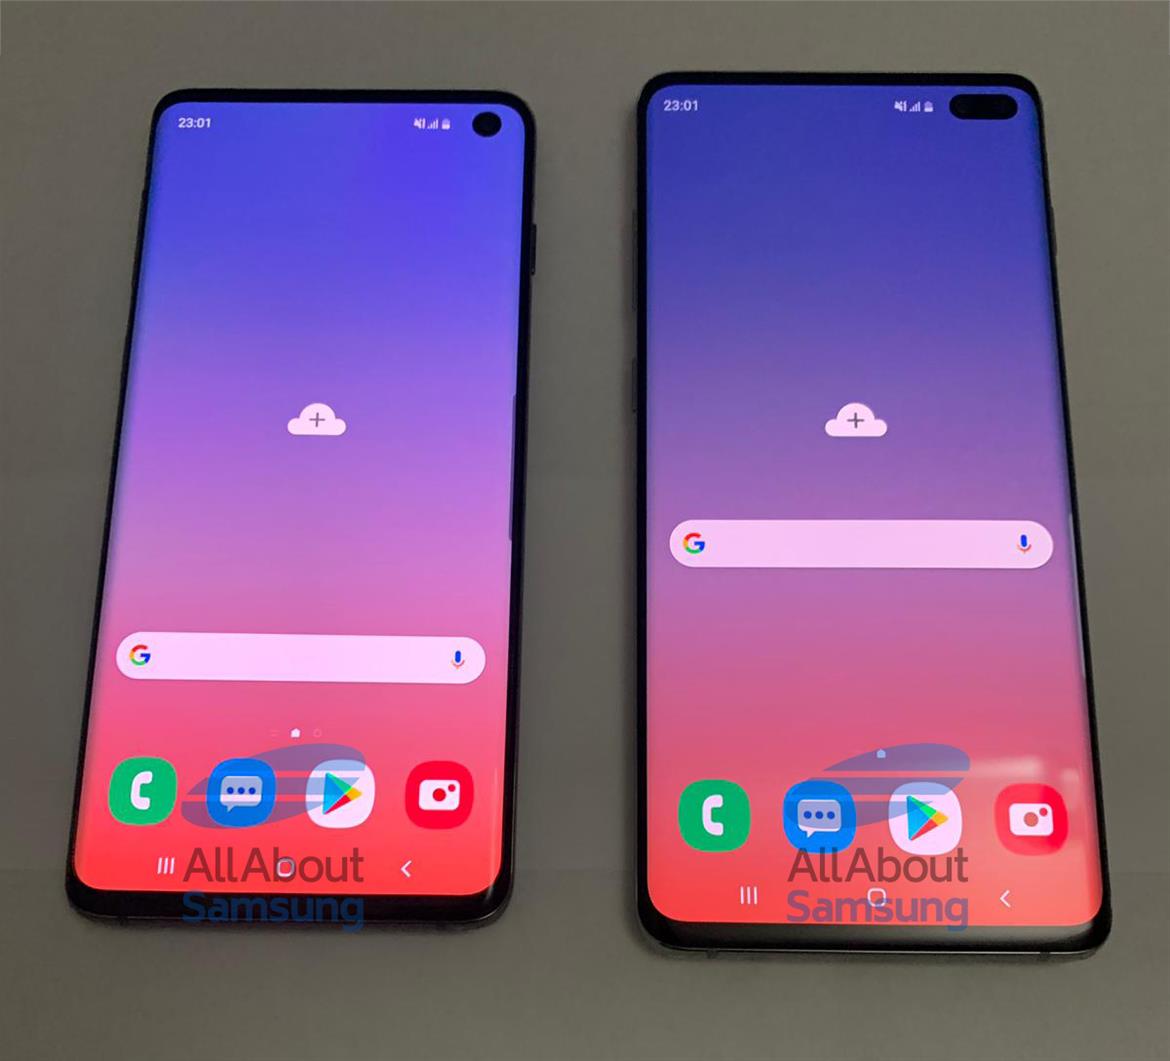 Samsung Galaxy S10 And S10+ Snapdragon 855 Flagships Fully Leaked In These Detailed Photos